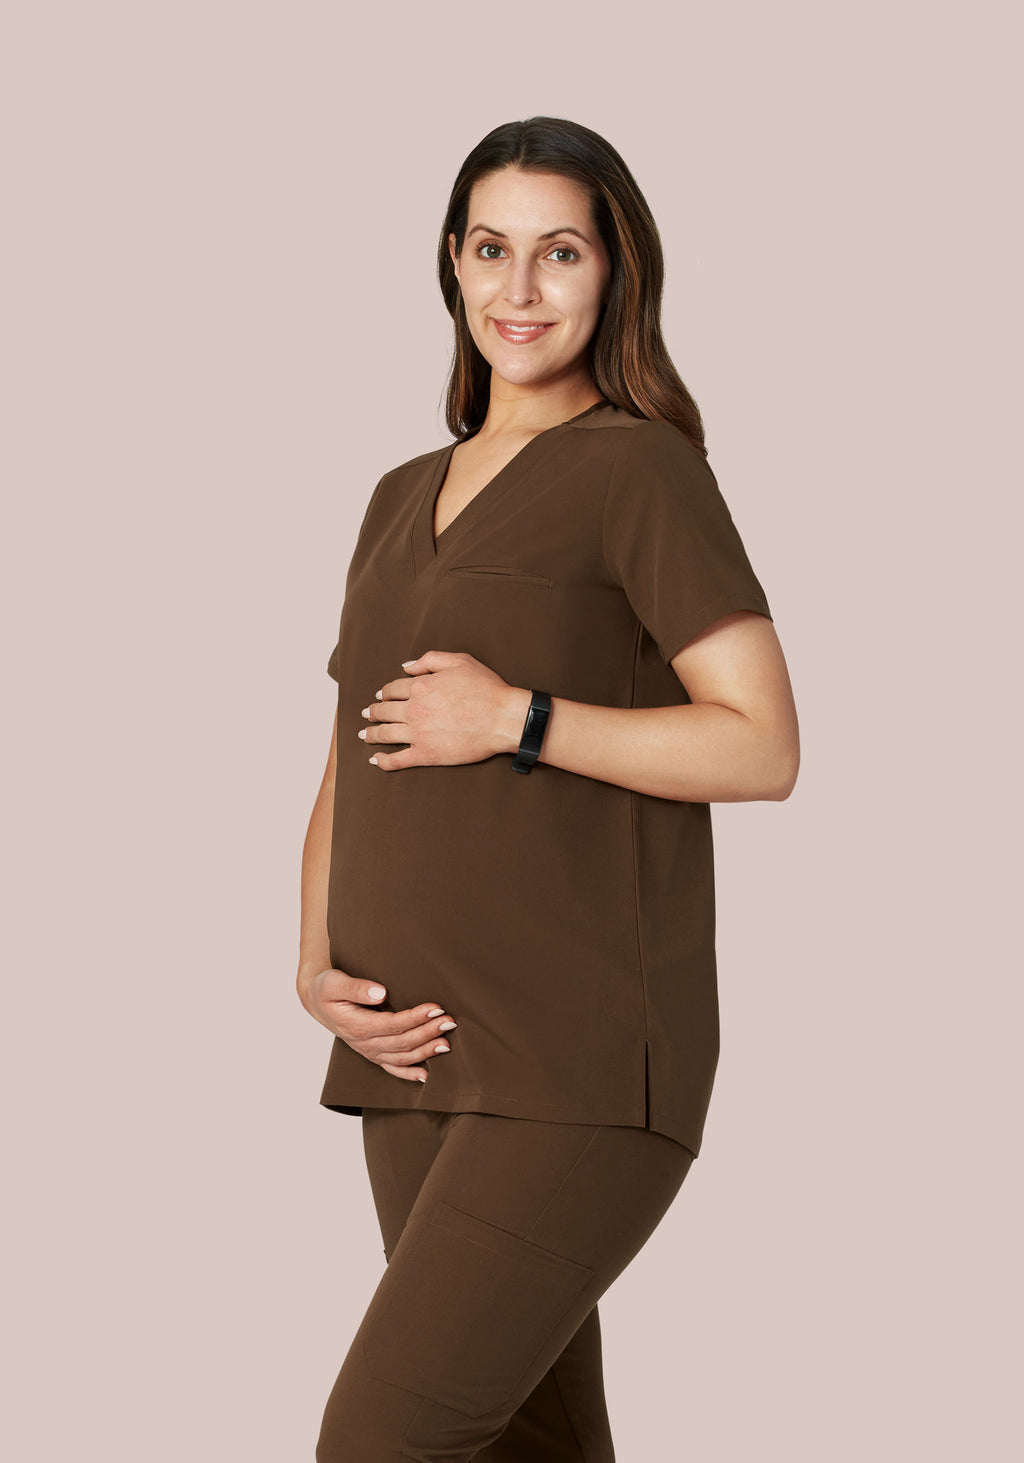 New* Chocolate Brown Career Maternity Pants by Olian Maternity (Size Small)  - Motherhood Closet - Maternity Consignment